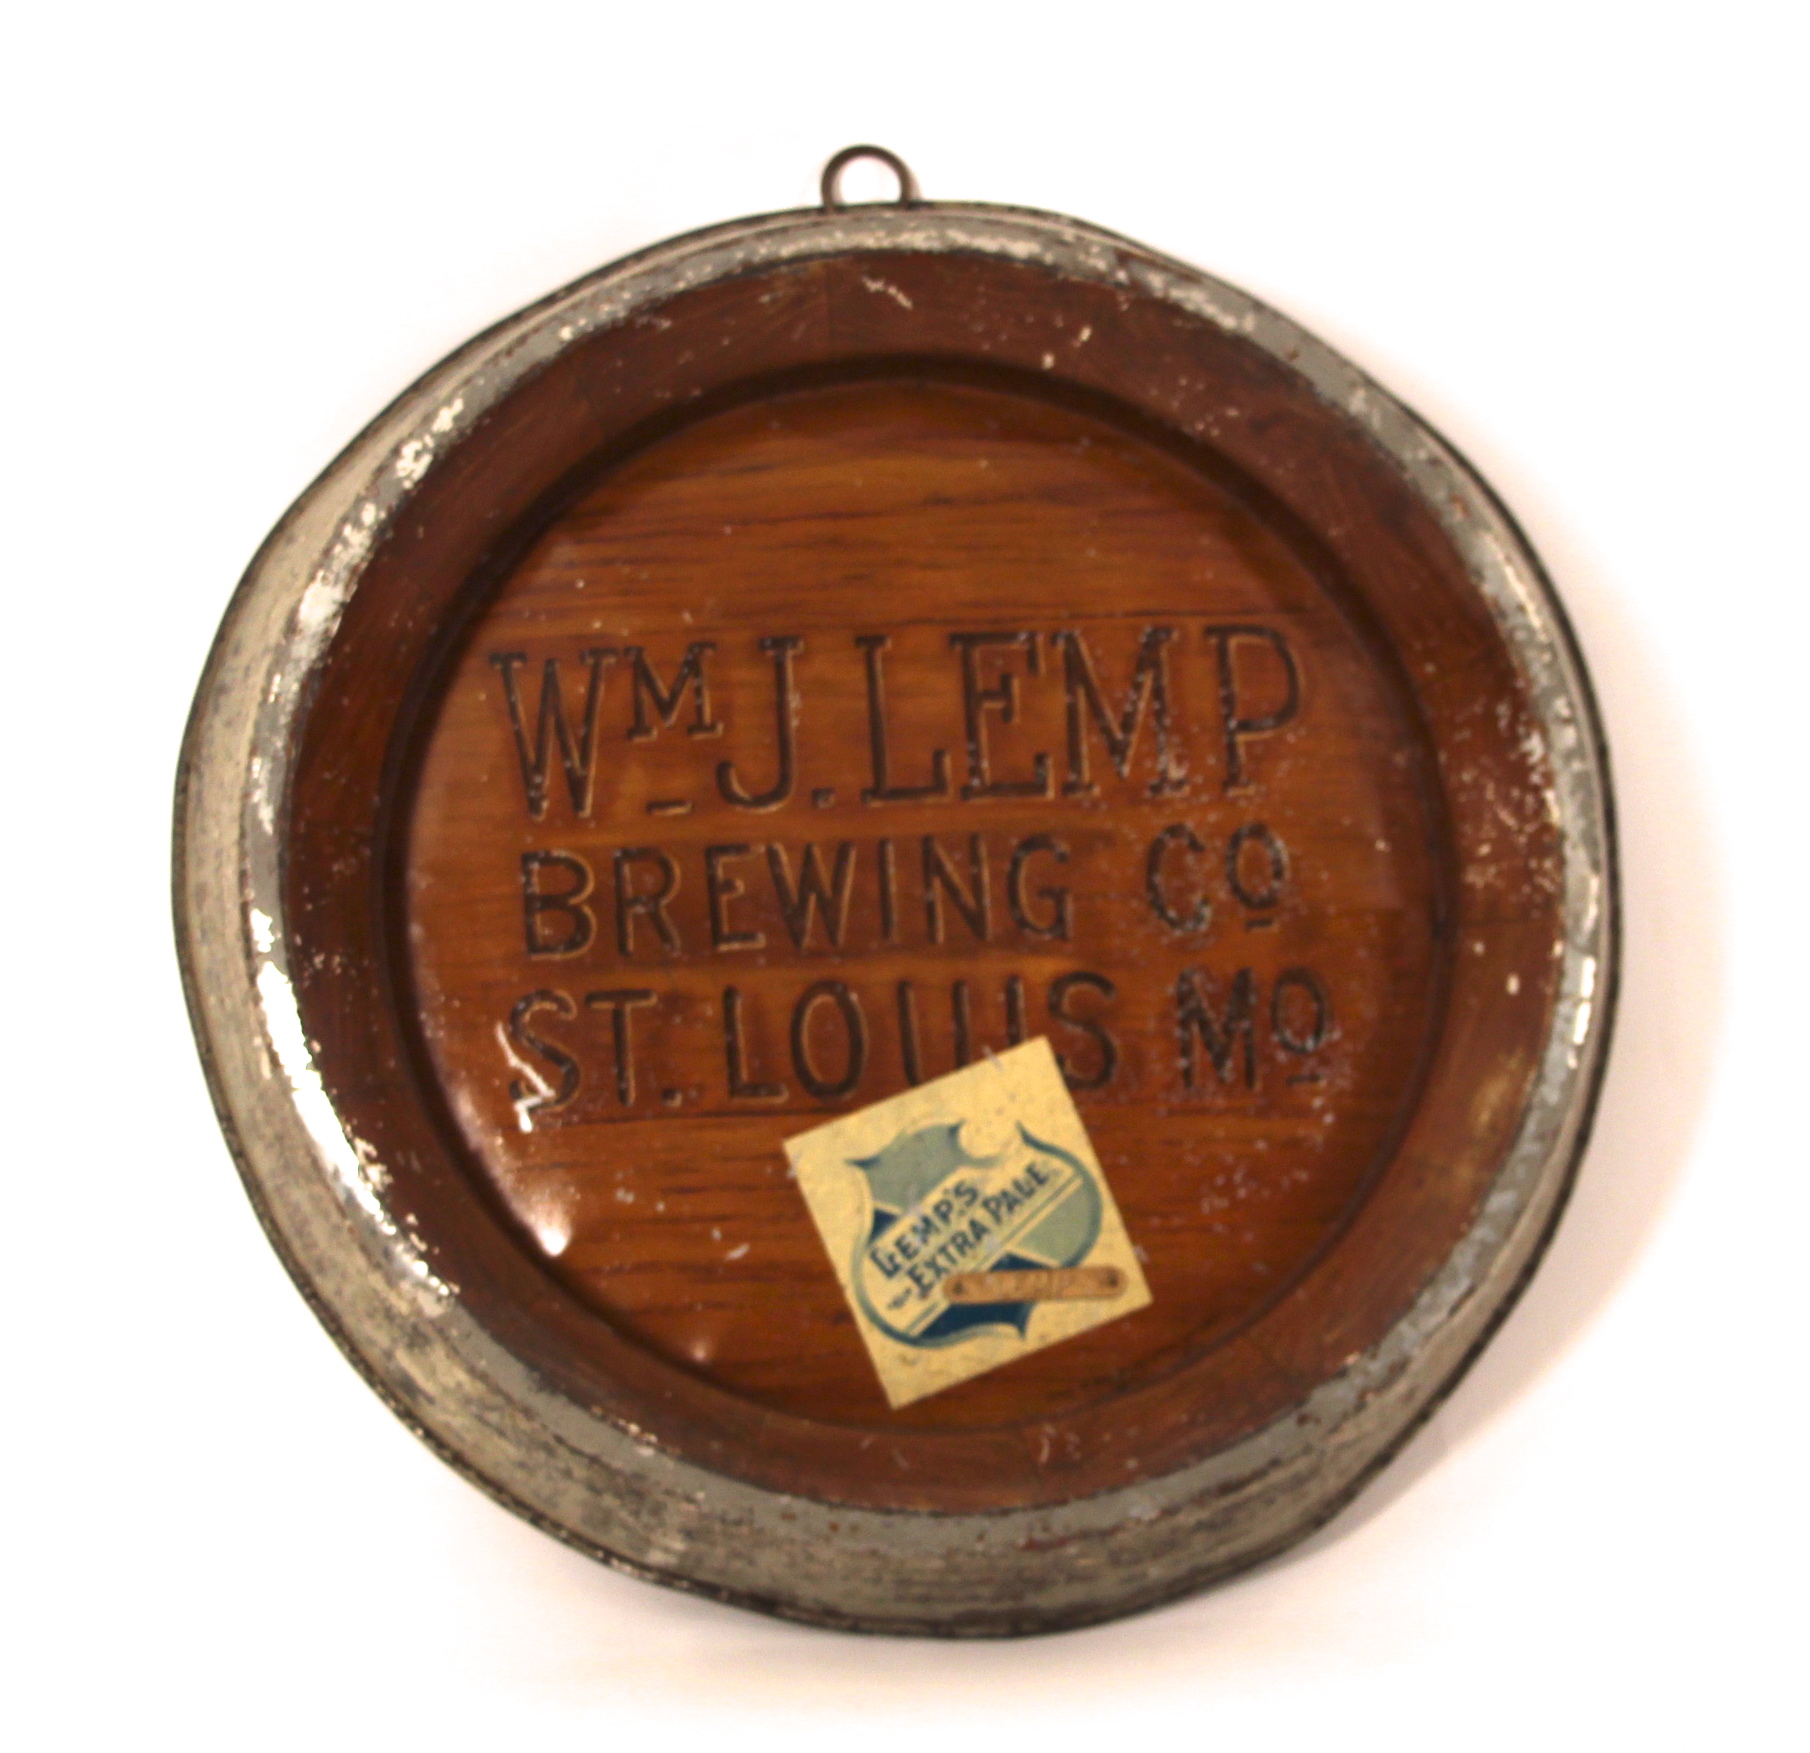 The Antique Advertising Expert | Lemp Brewery Beer Self-Framed Tin Barrel Sign, St. Louis, MO ...